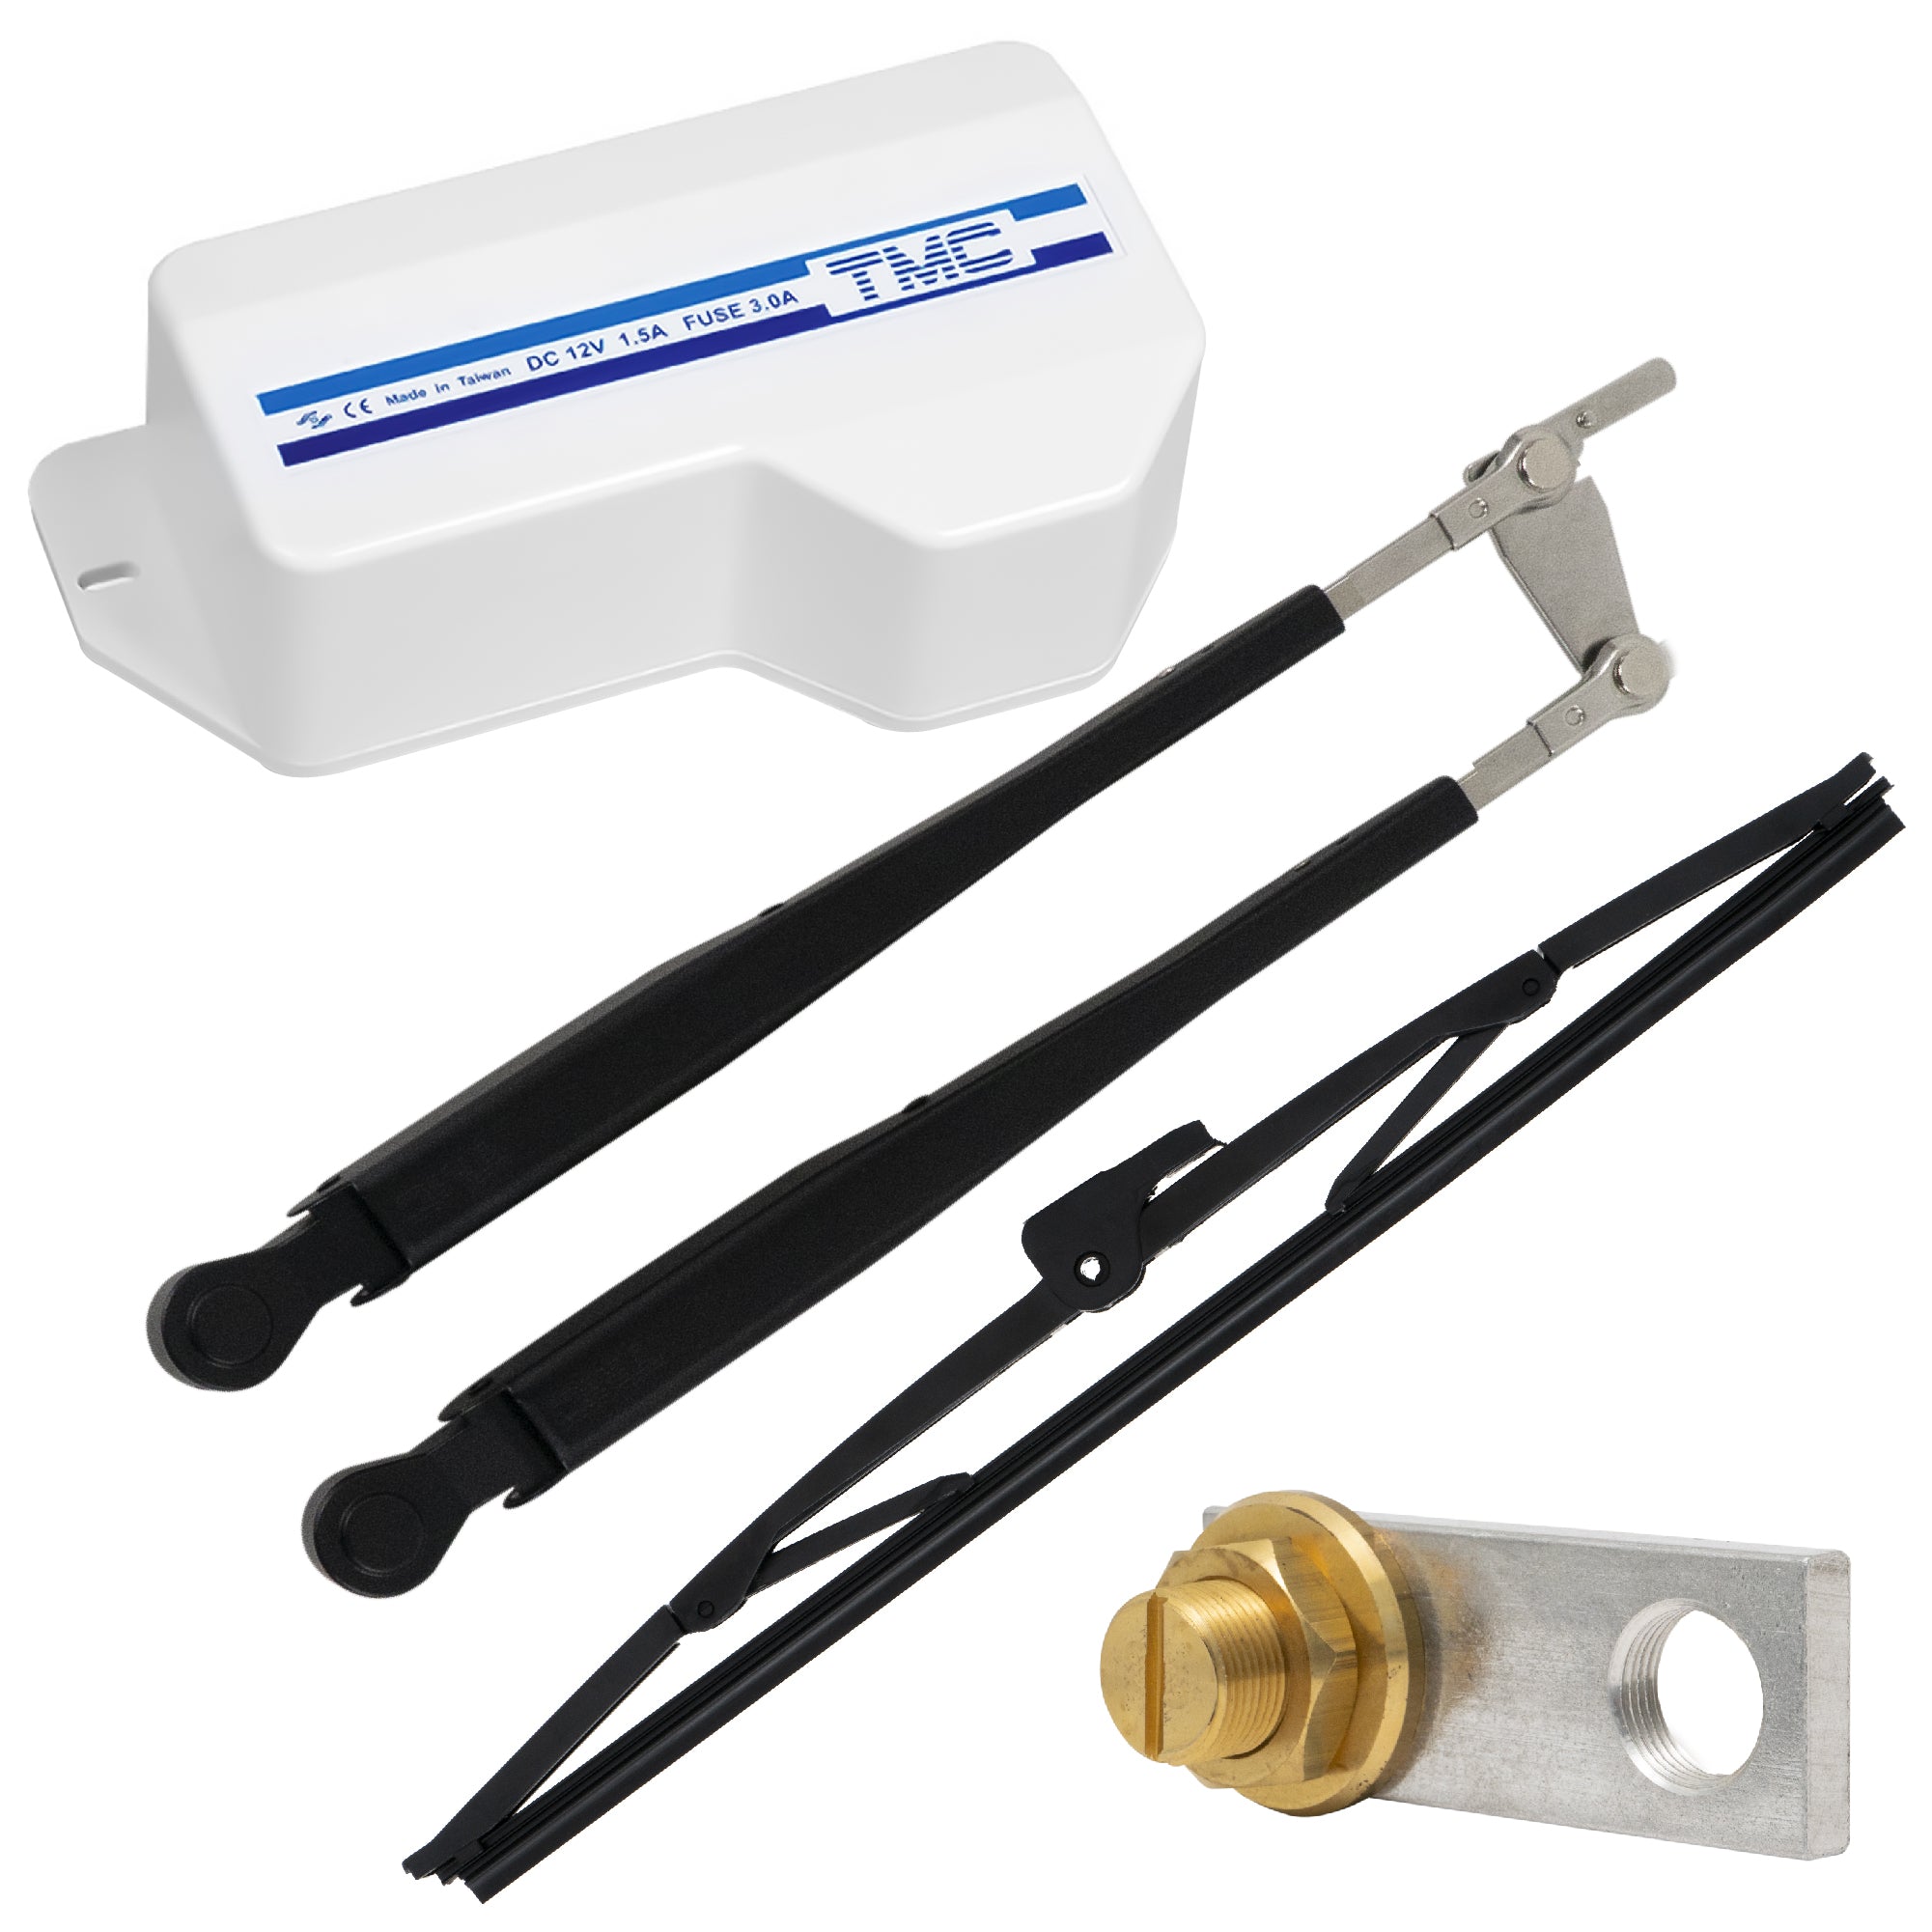 TMC Complete Windshield System Kit  - FO746-C9